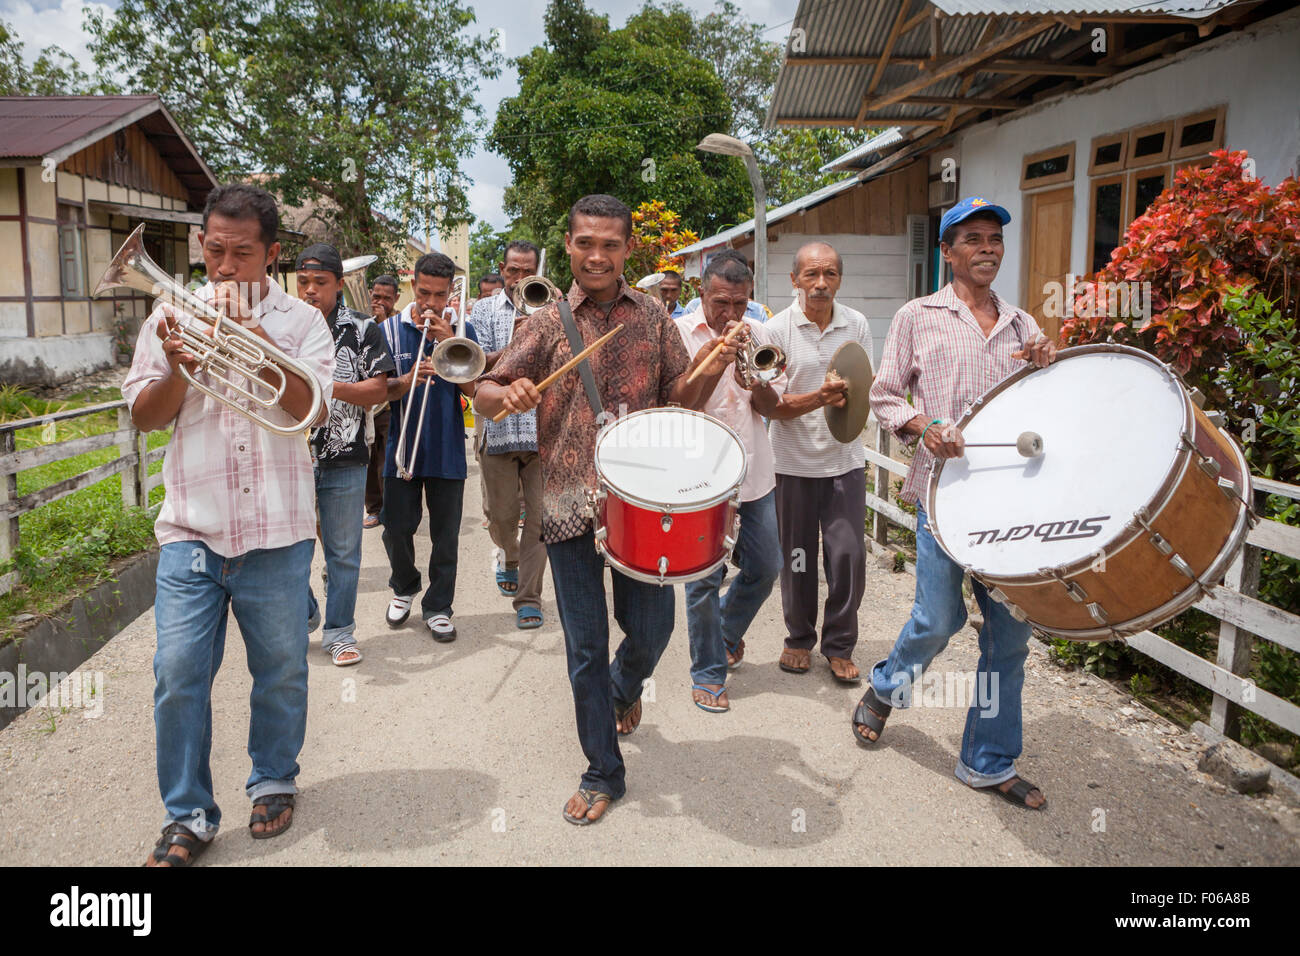 Villagers playing trumpets and drums during a rural orchestra performance to welcome tourists in Rumahkay, West Seram, Maluku, Indonesia. Stock Photo